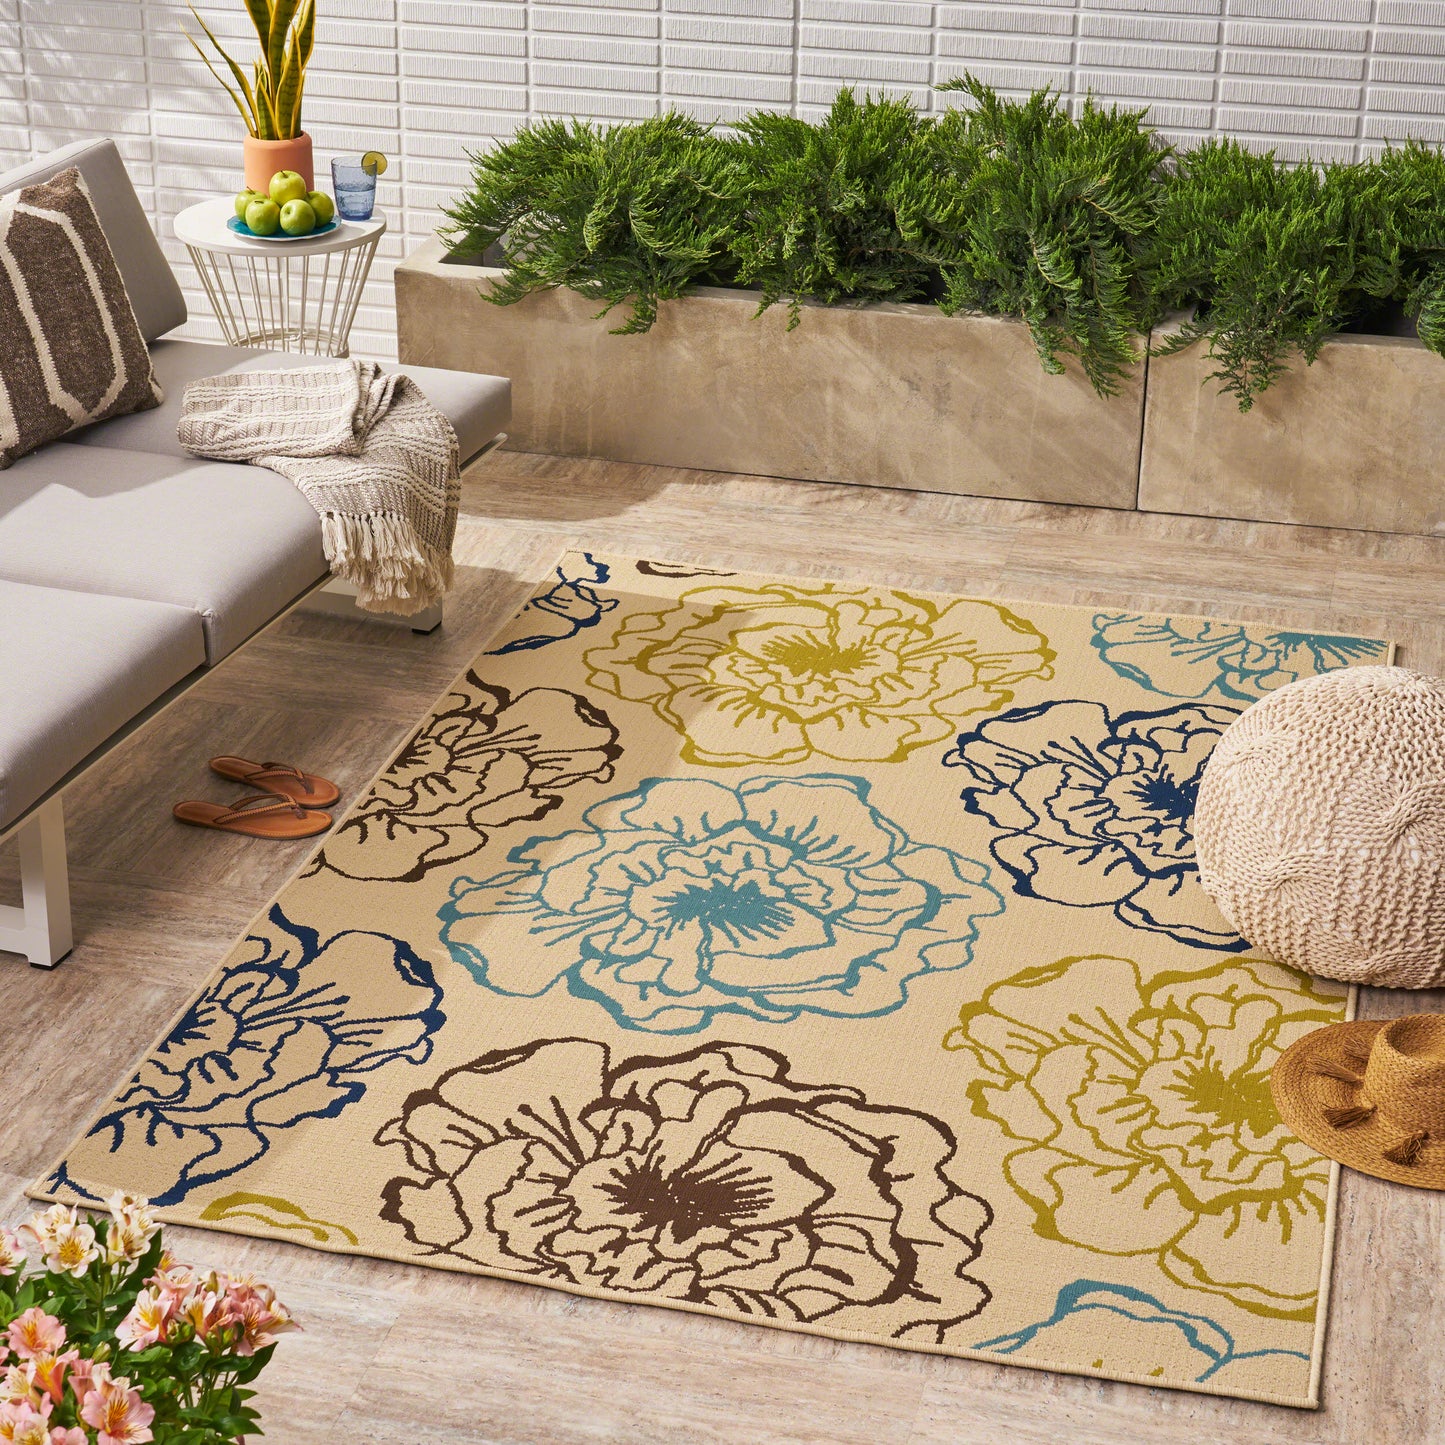 Damaris Outdoor Floral 5 x 8 Area Rug, Ivory and Multicolored